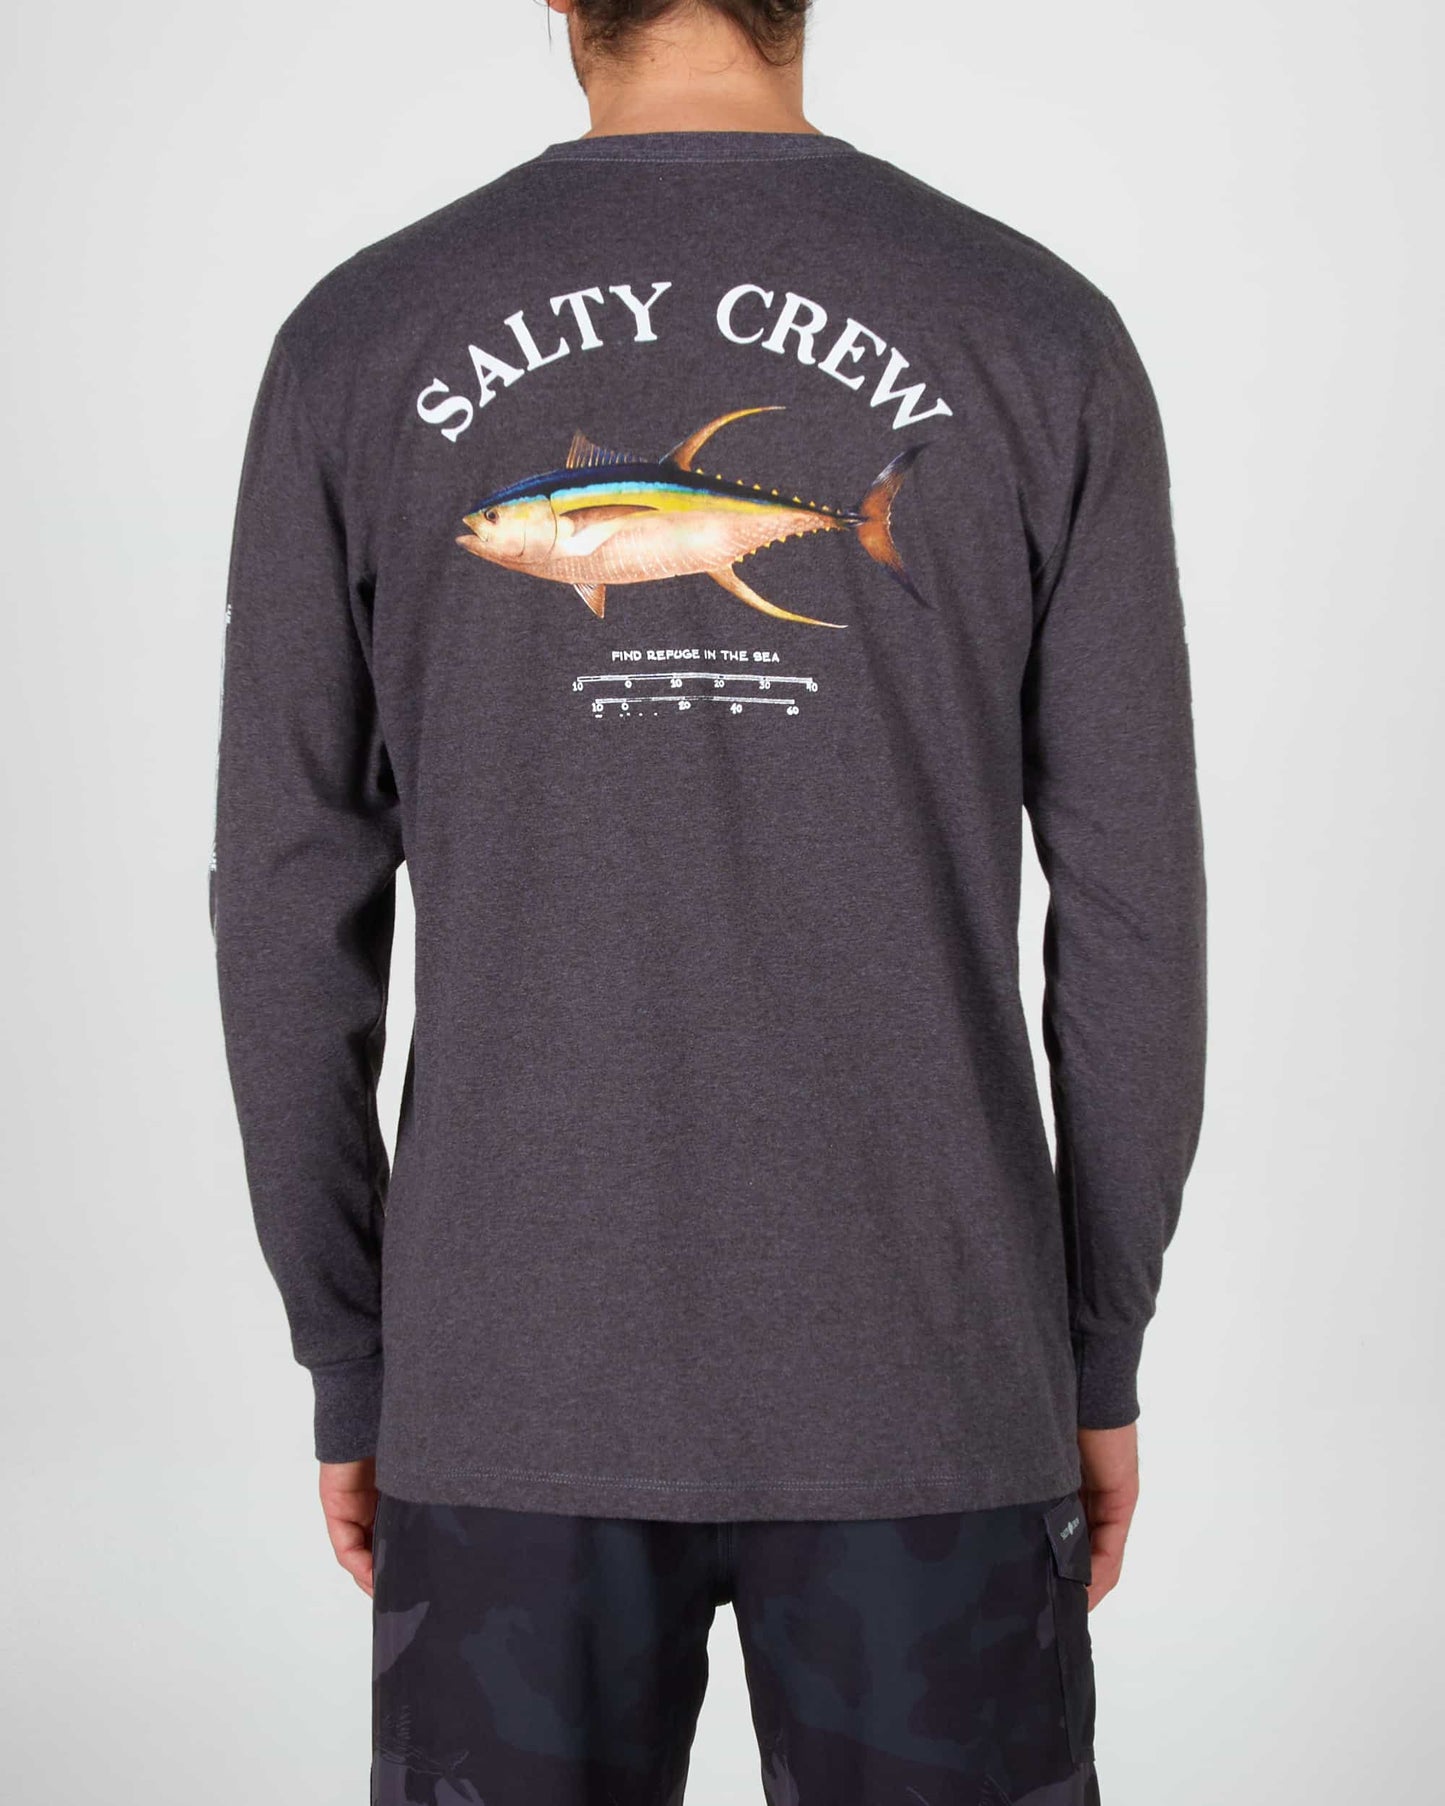 Salty crew T-SHIRTS L/S AHI MOUNT LS - CHARCOAL HEATHER in CHARCOAL HEATHER